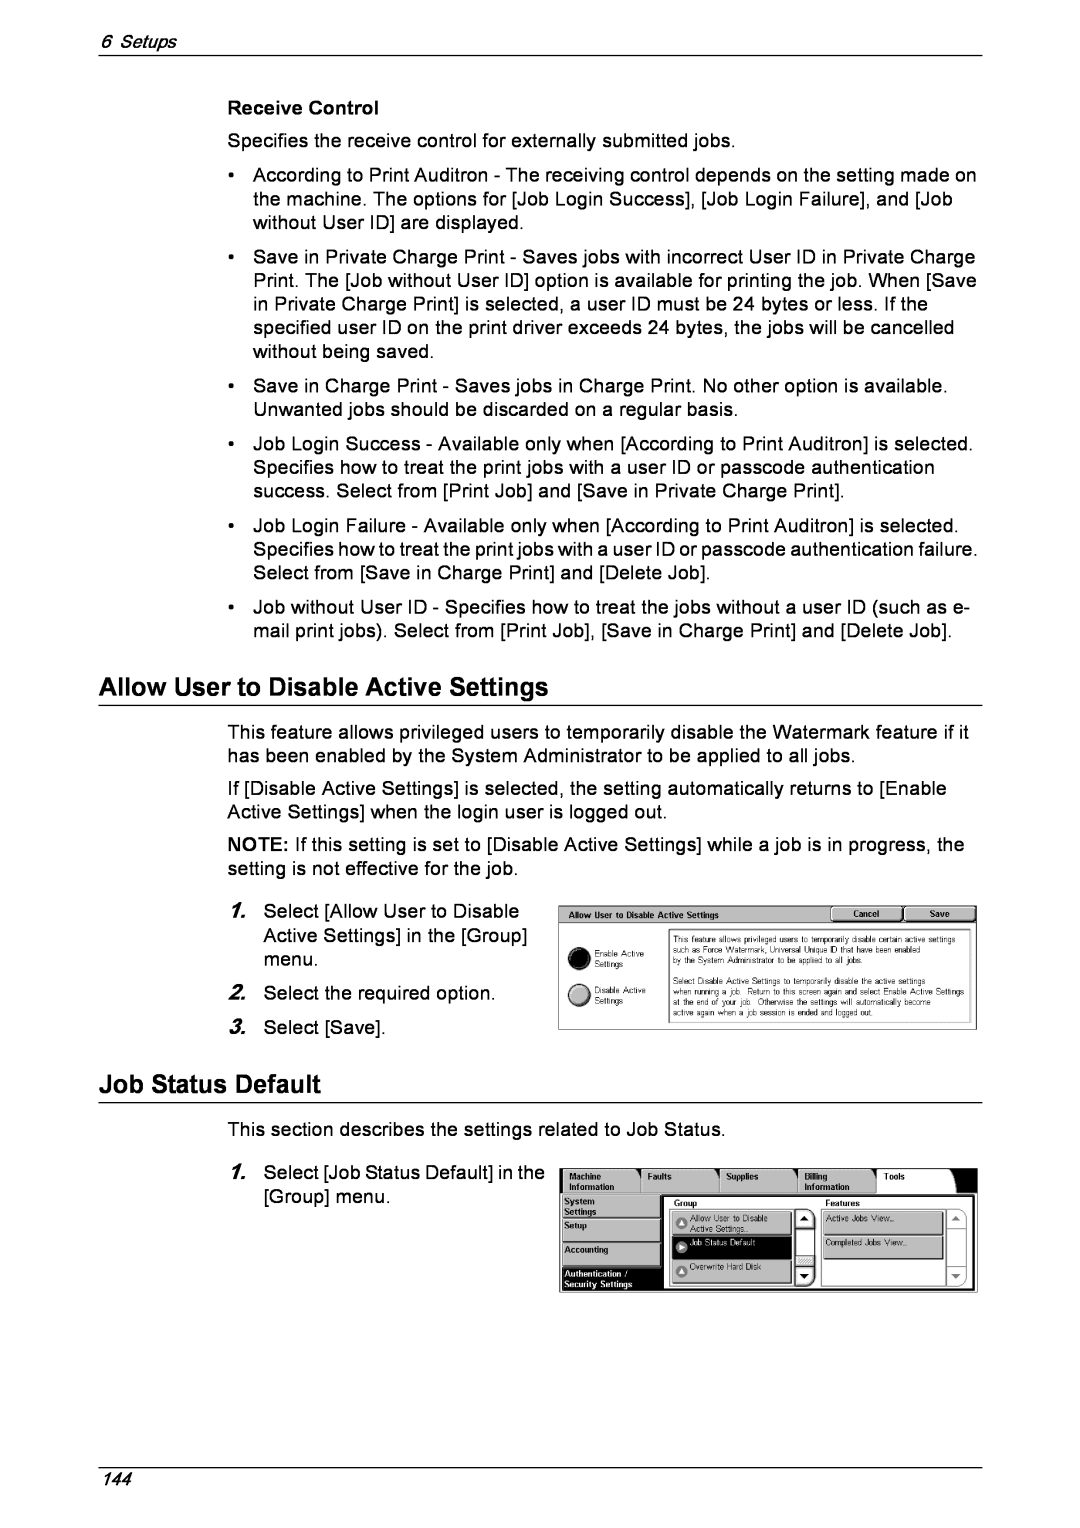 Xerox 5222 manual Allow User to Disable Active Settings, Job Status Default, Receive Control 